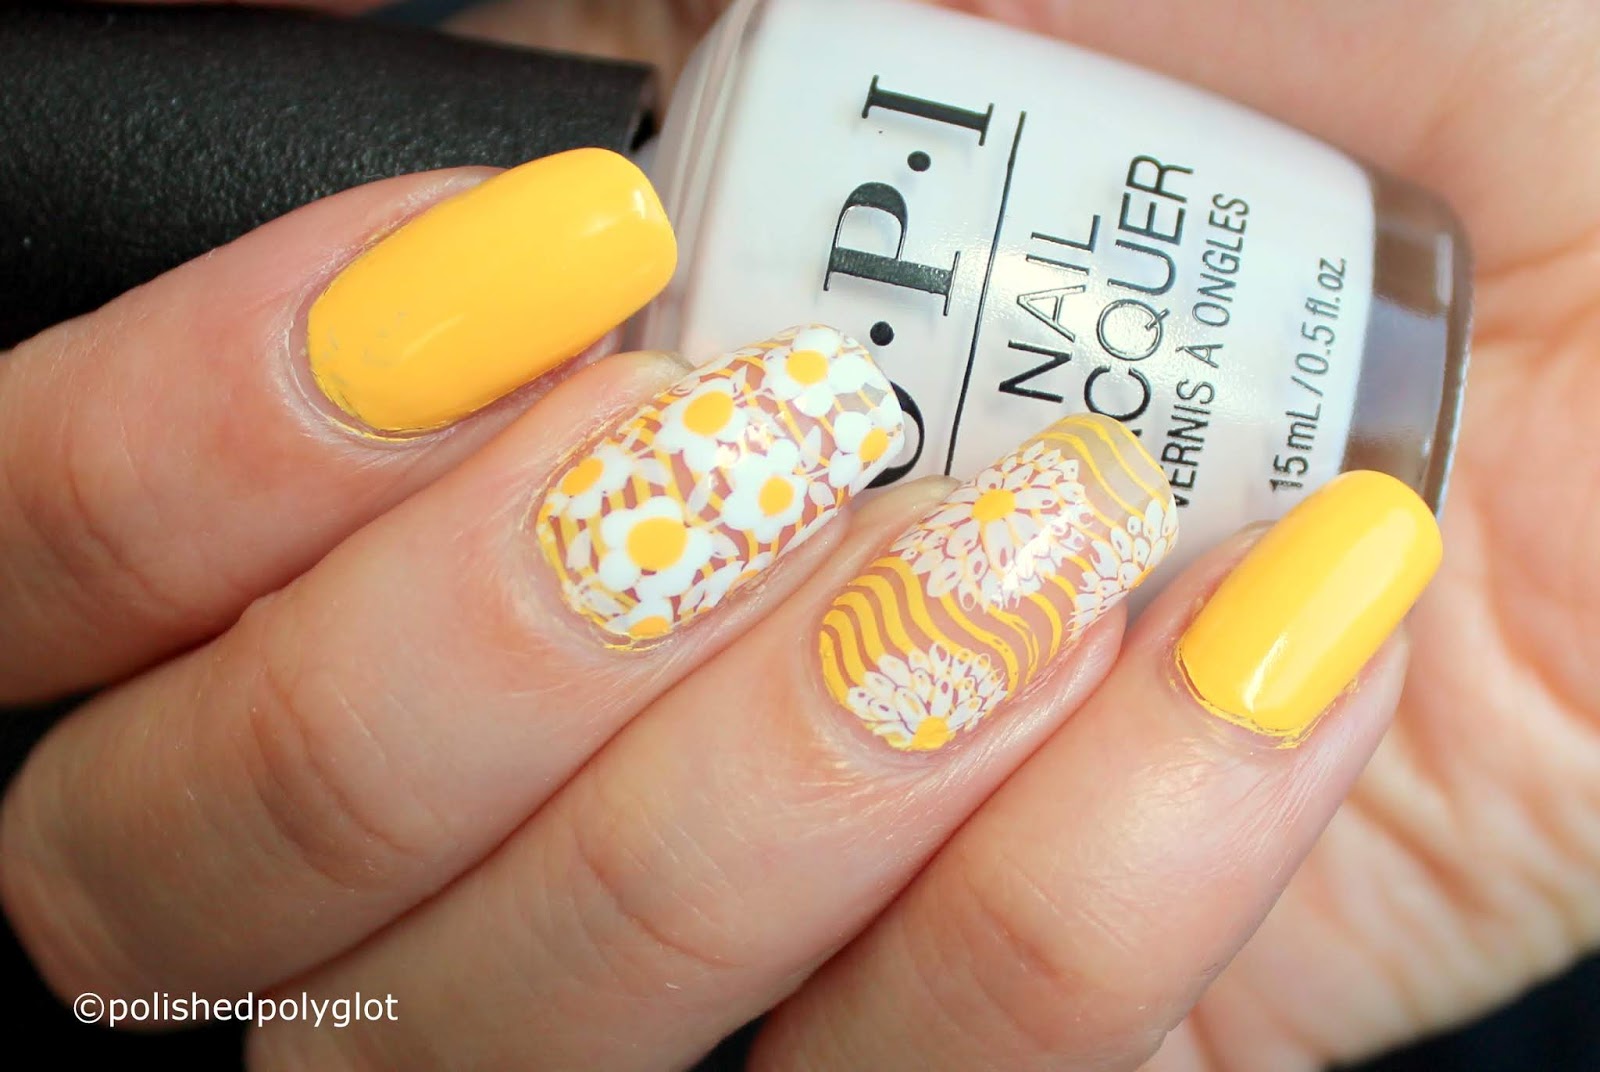 4. Grey and Yellow Striped Nail Art - wide 4